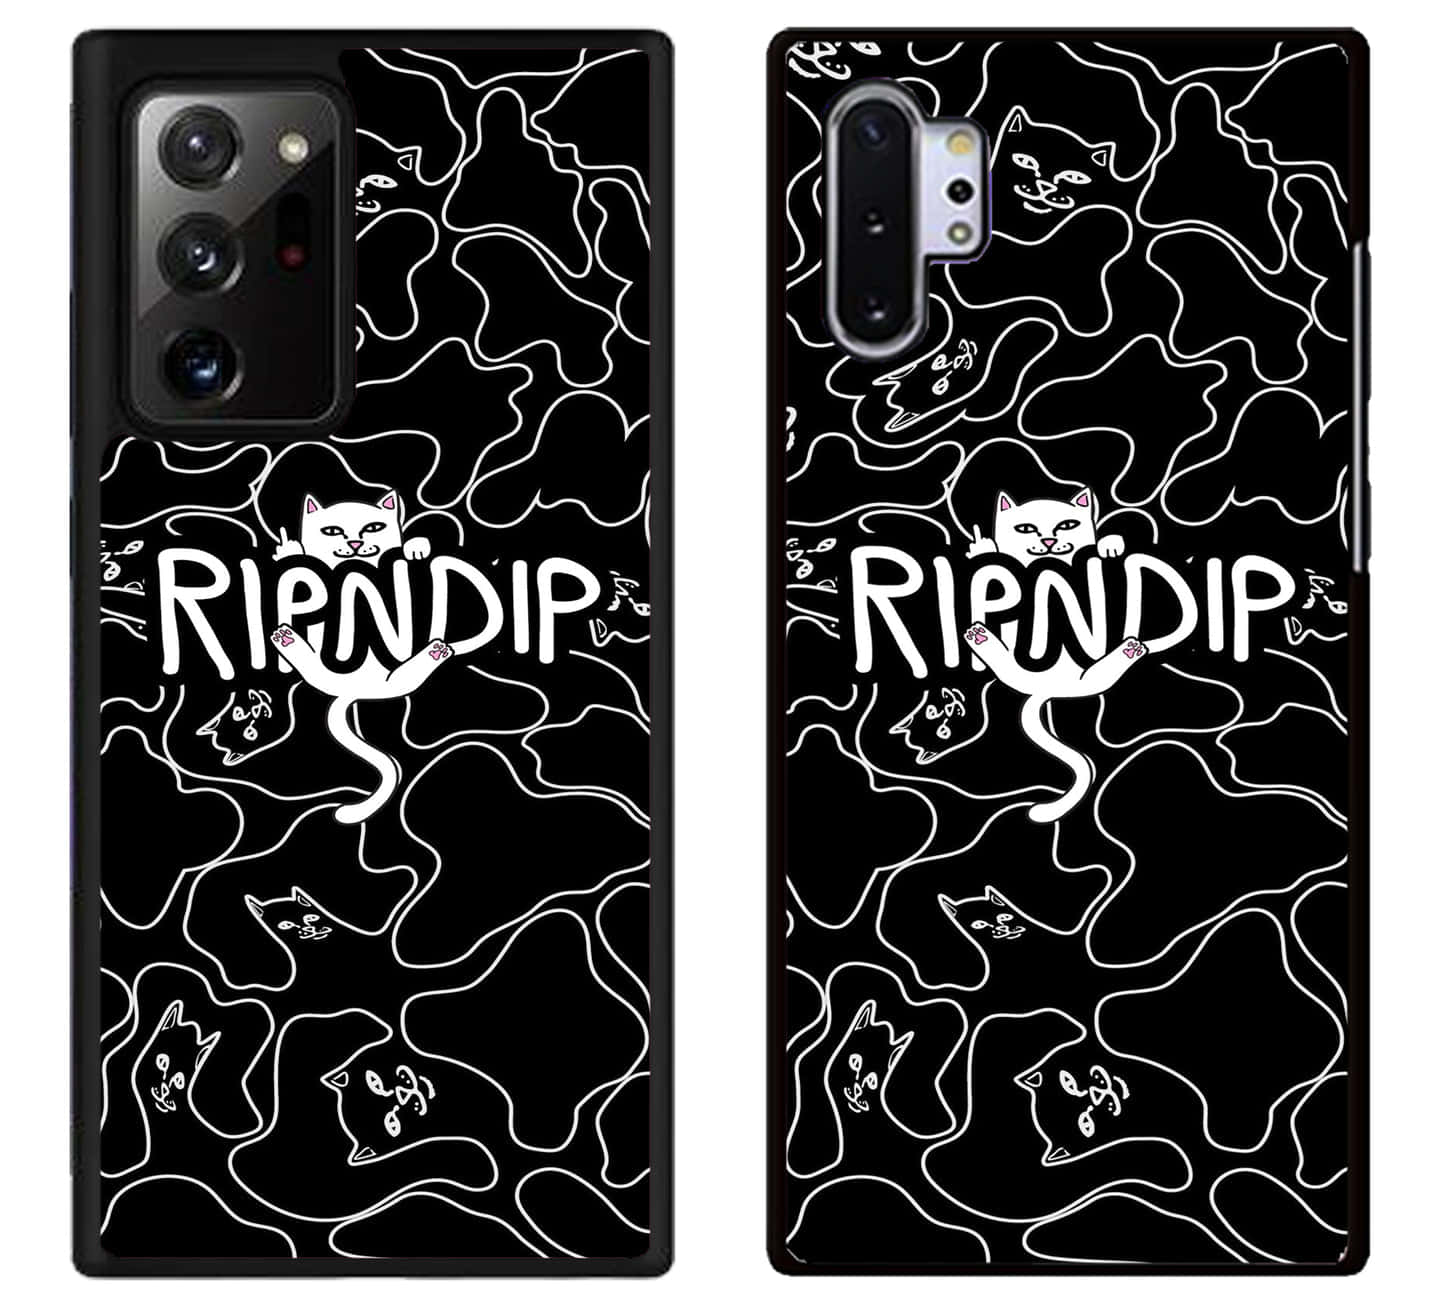 A Black And White Camouflage Samsung Galaxy S10 Case With The Word Frienddip Background